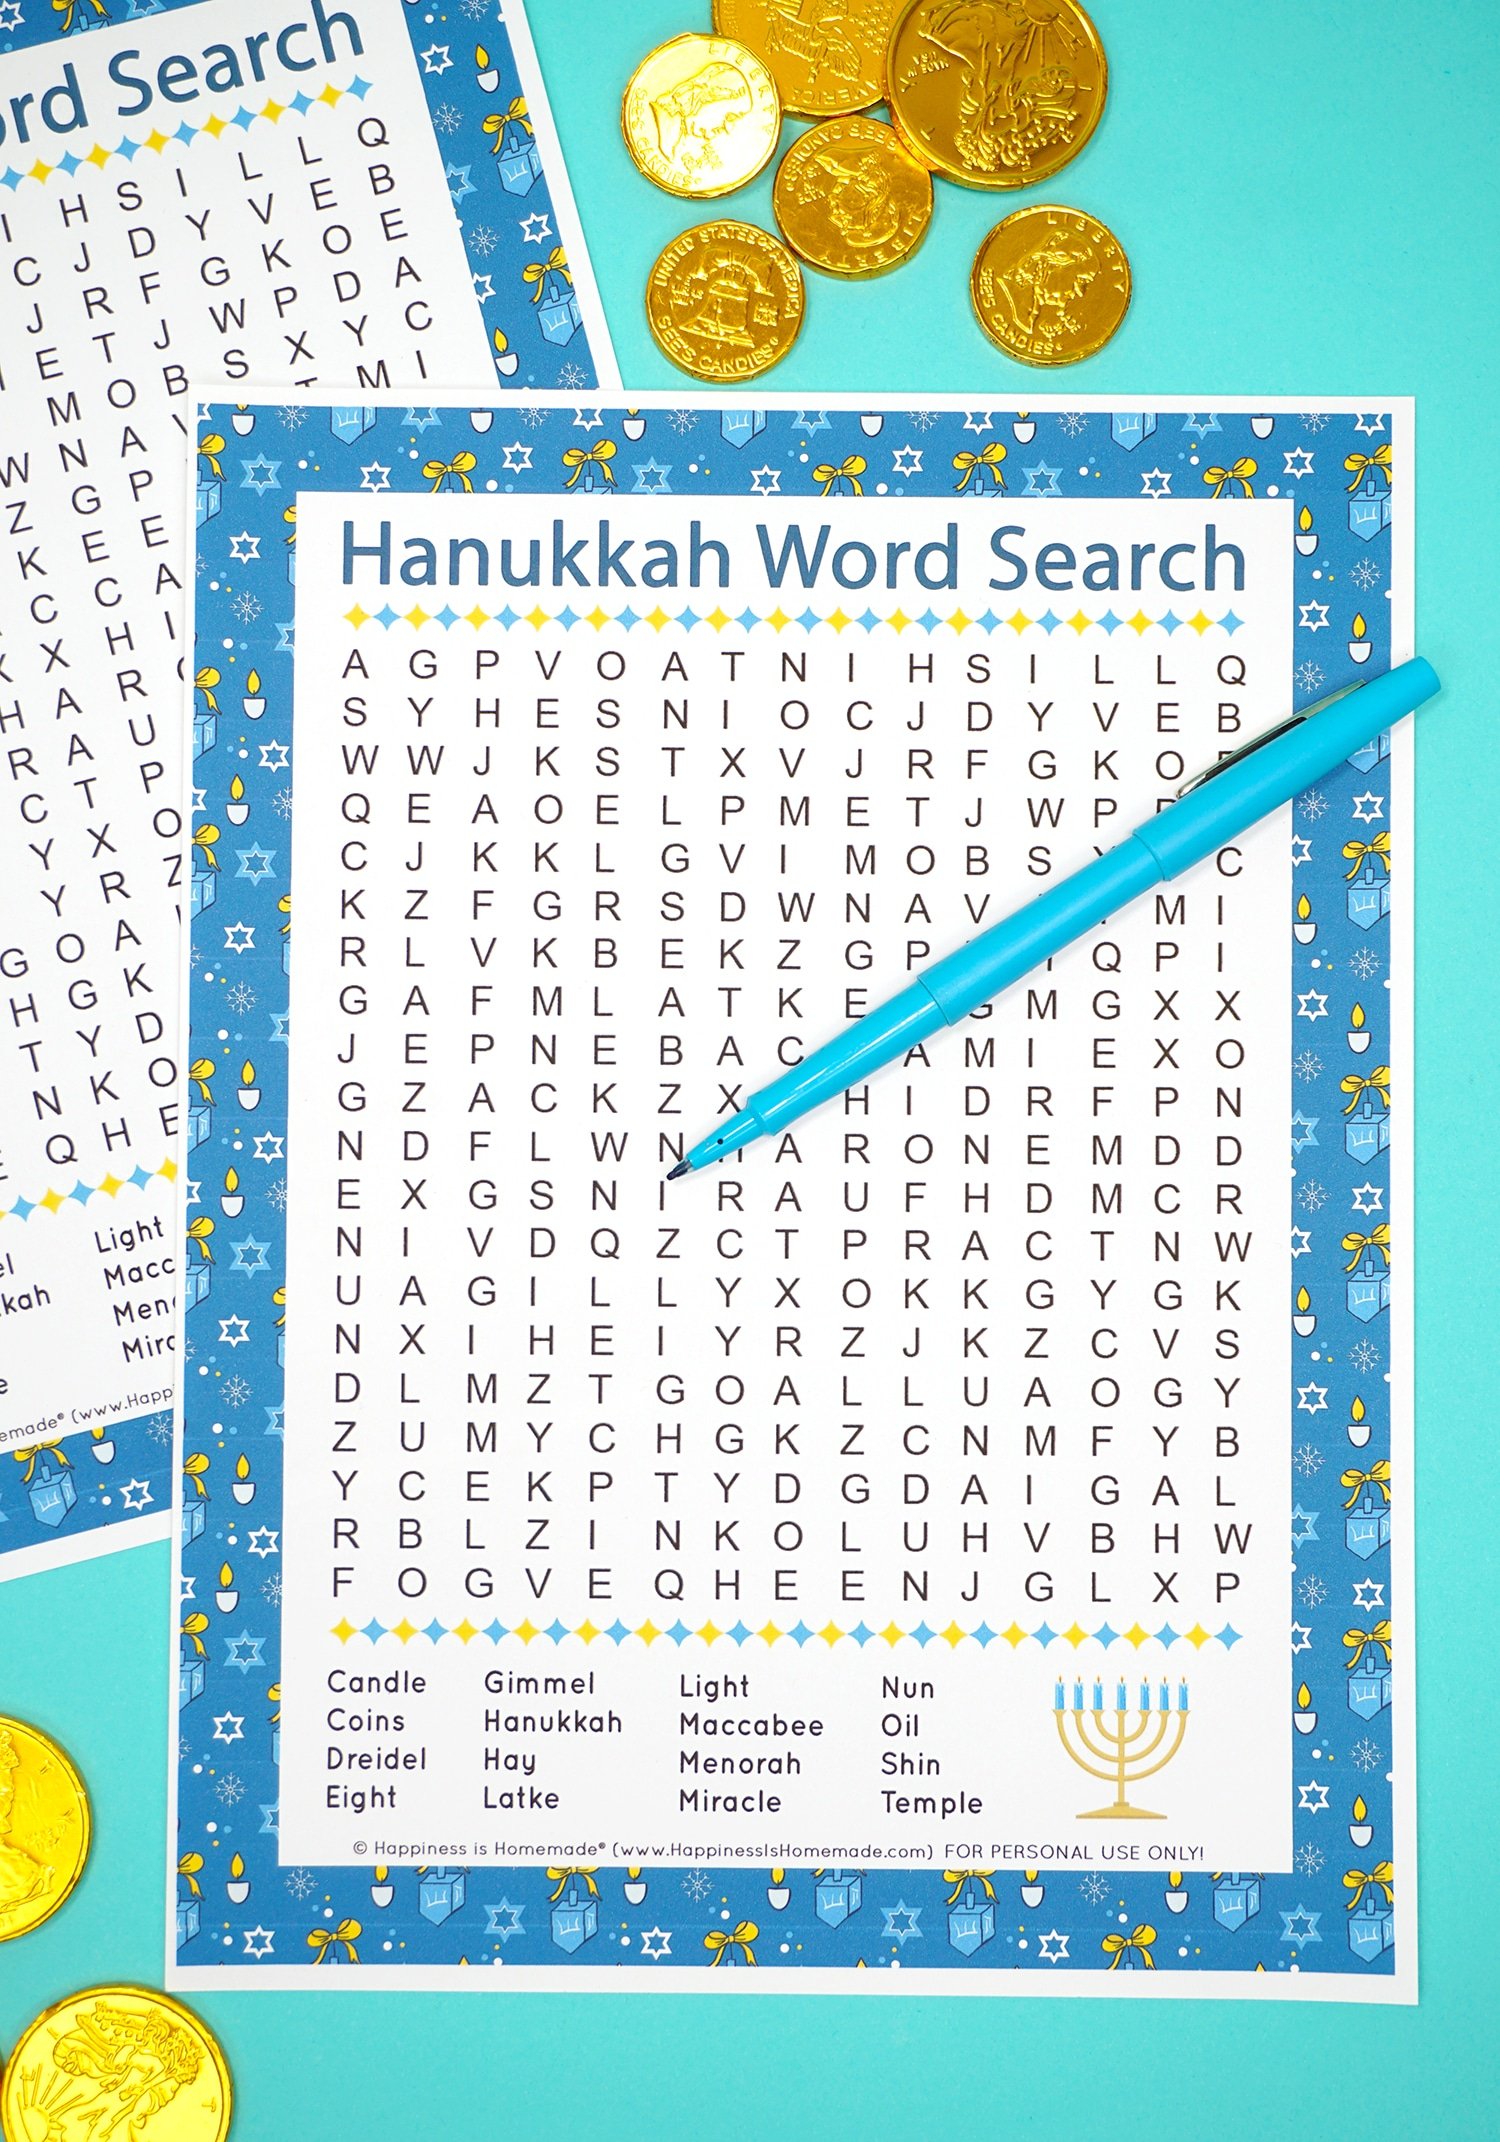 Hanukkah Word Search for Kids & Adults Happiness is Homemade